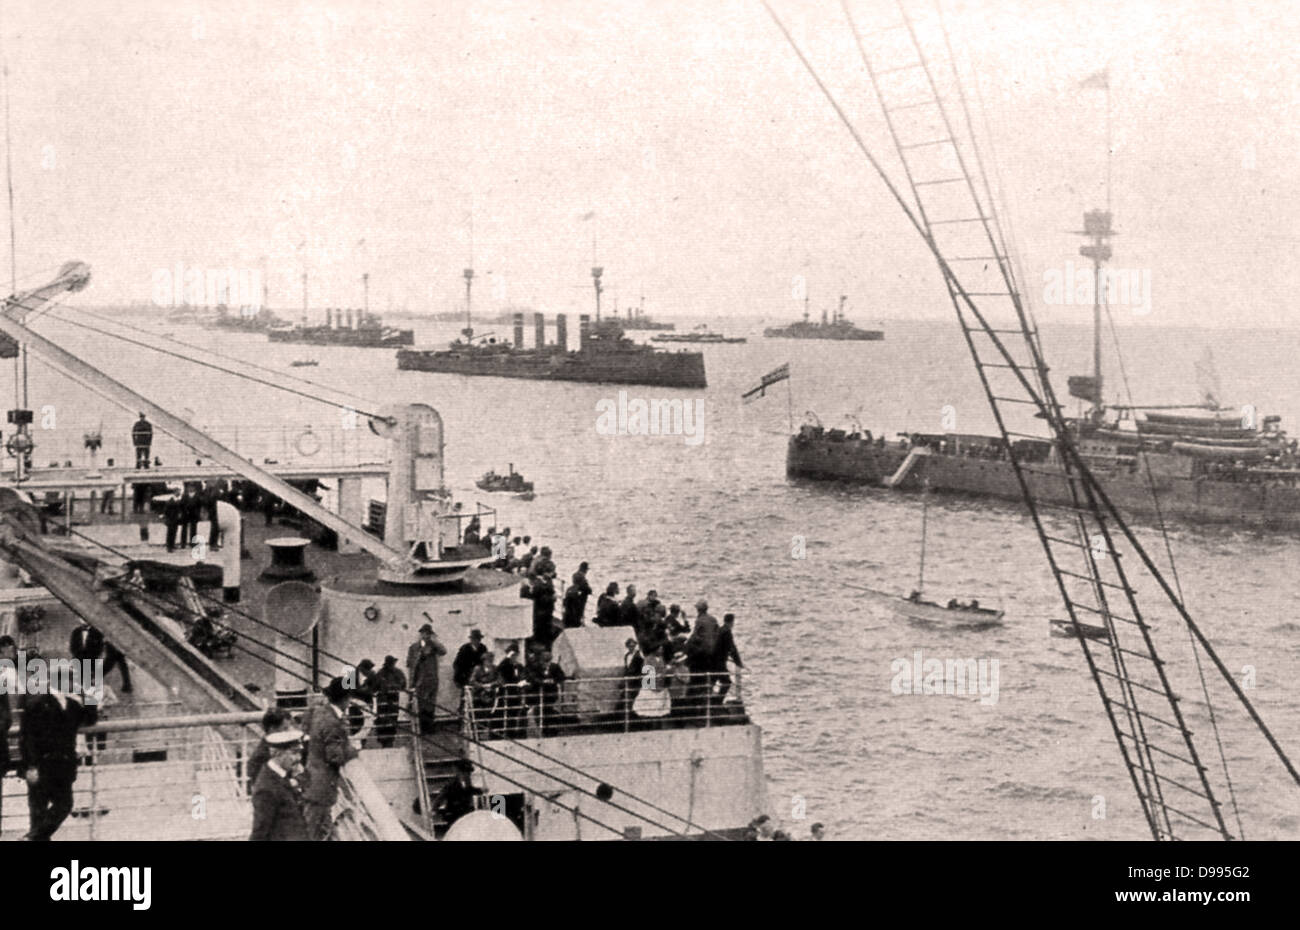 The British fleet off Portsmouth. Portsmouth Is the oldest Royal Navy base and the location of the Royal Naval Dockyard where HMS 'Dreadnought' was built in 1906. Stock Photo